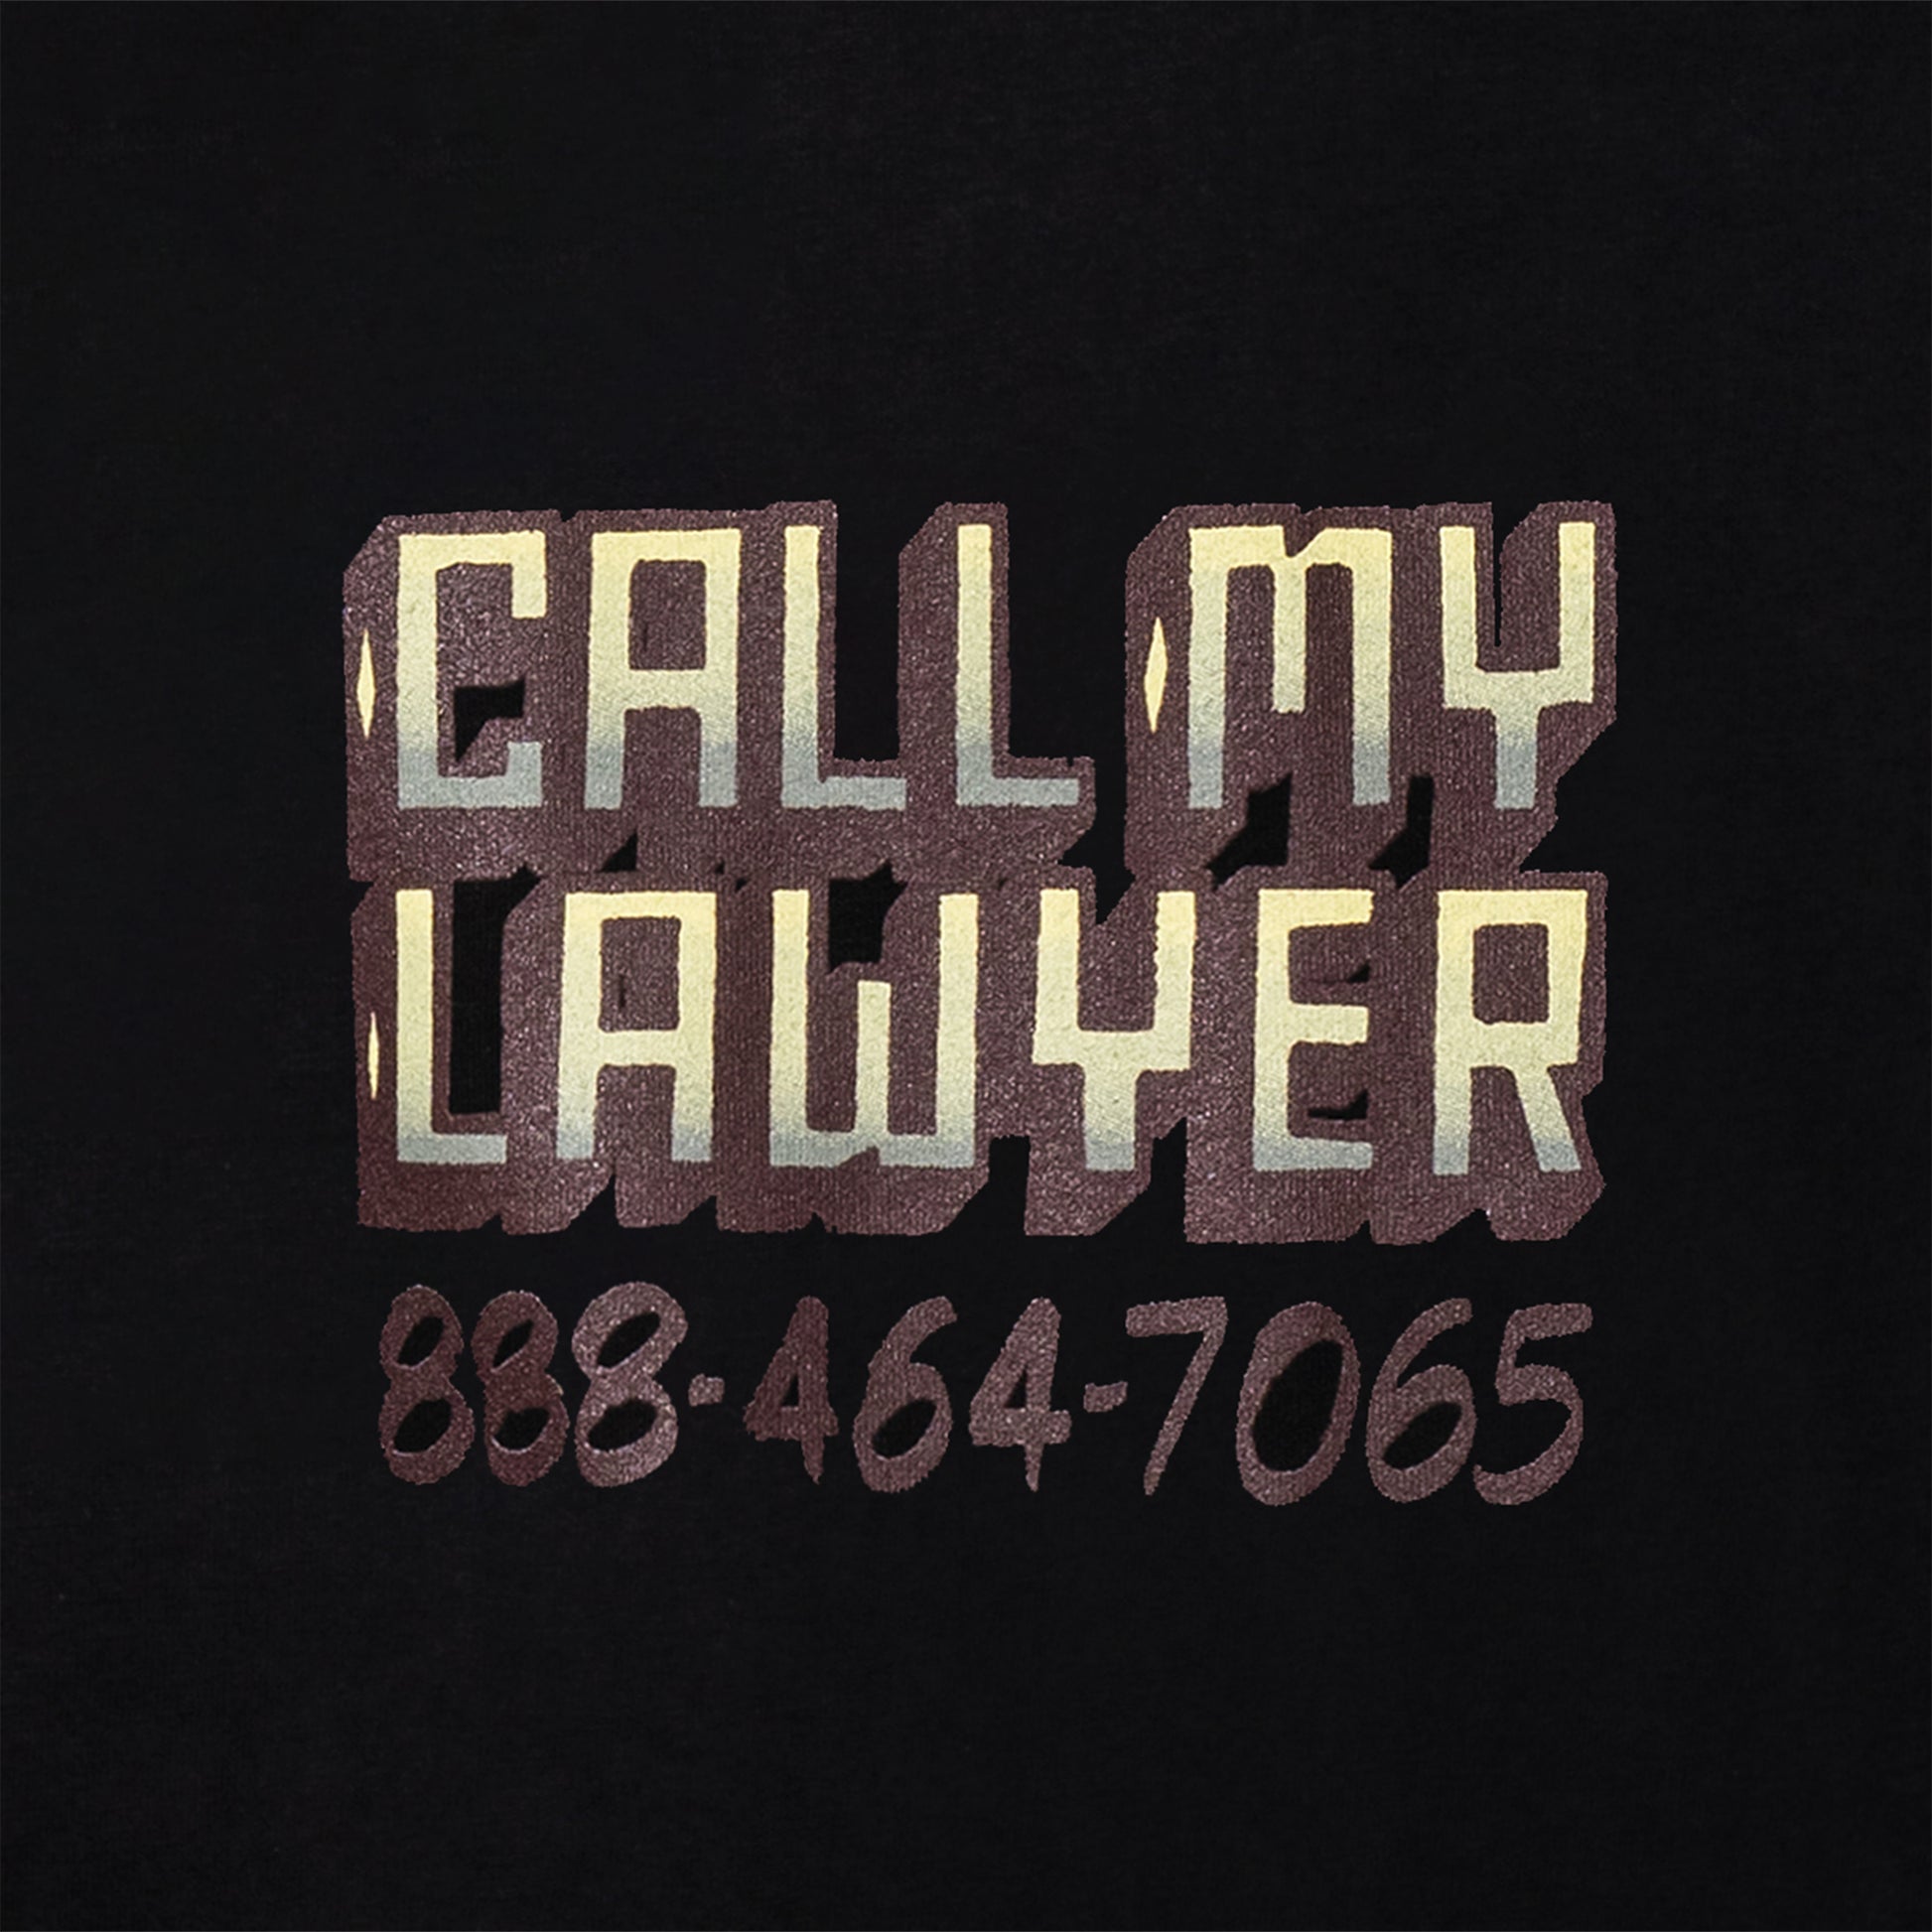 MARKET clothing brand CALL MY LAWYER SIGN T-SHIRT. Find more graphic tees, hats, hoodies and more at MarketStudios.com. Formally Chinatown Market.